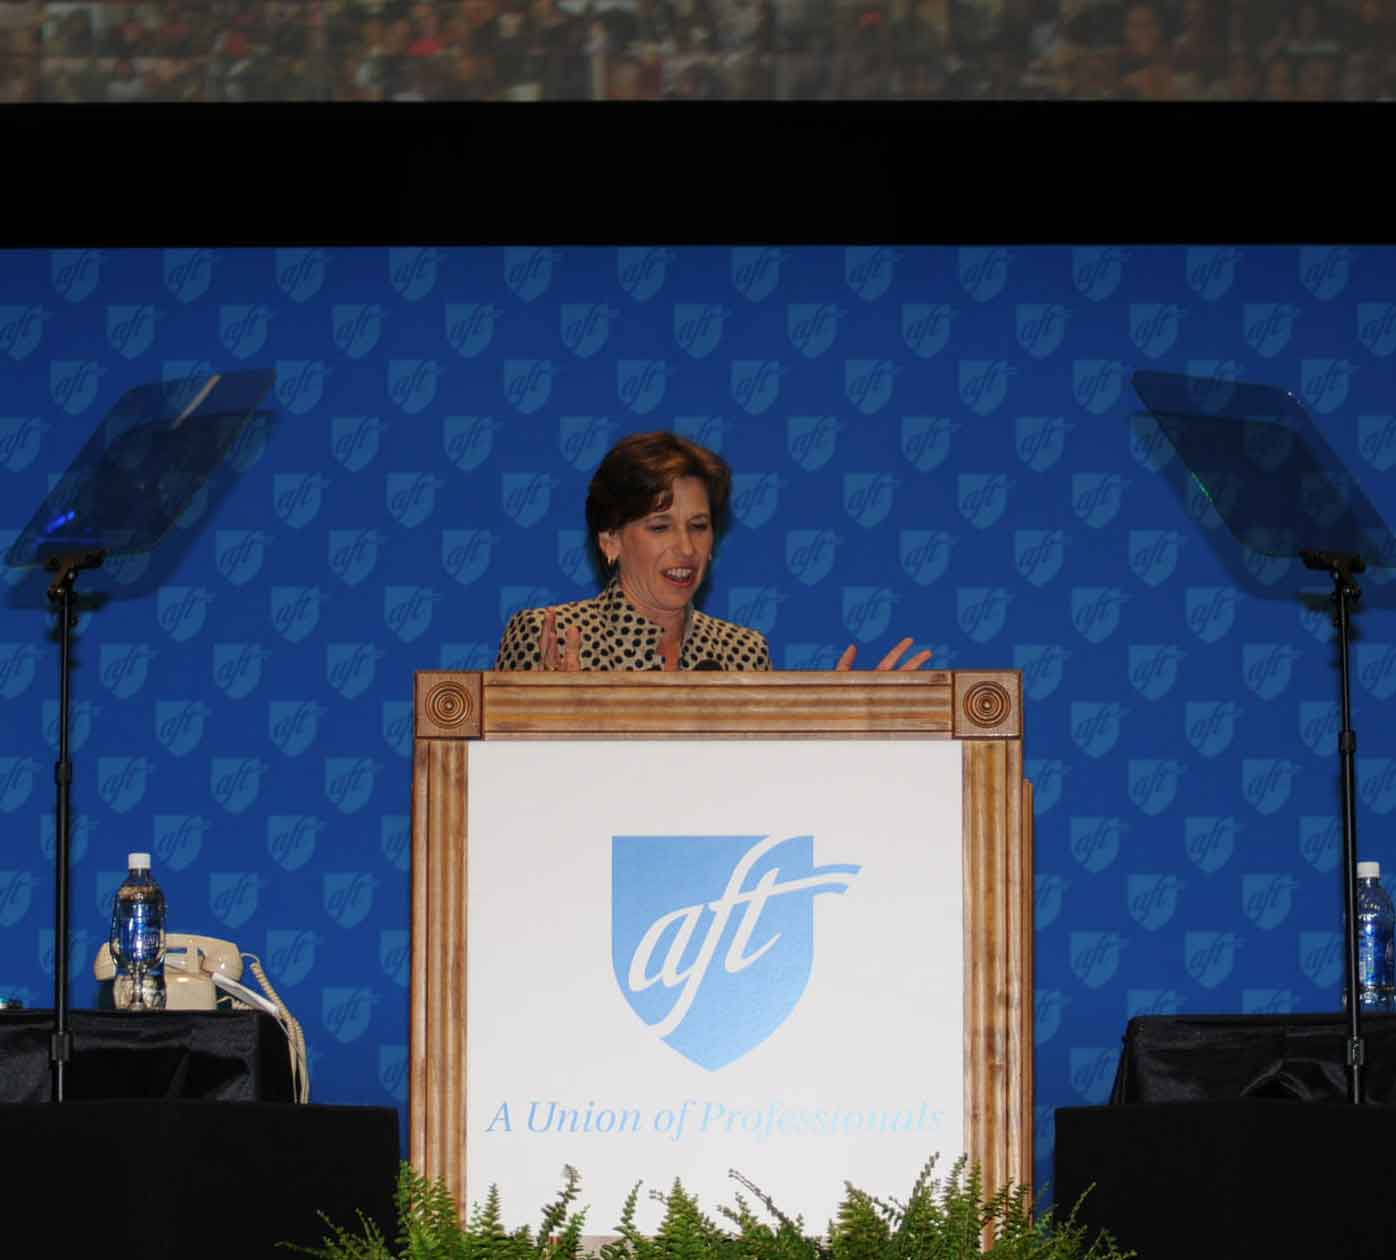 July 14, 2008. American Federation of Teachers (AFT) President Randi Weingarten delivers her acceptance speech at the union’s national convention in Chicago. Substance photo by George N. Schmidt.